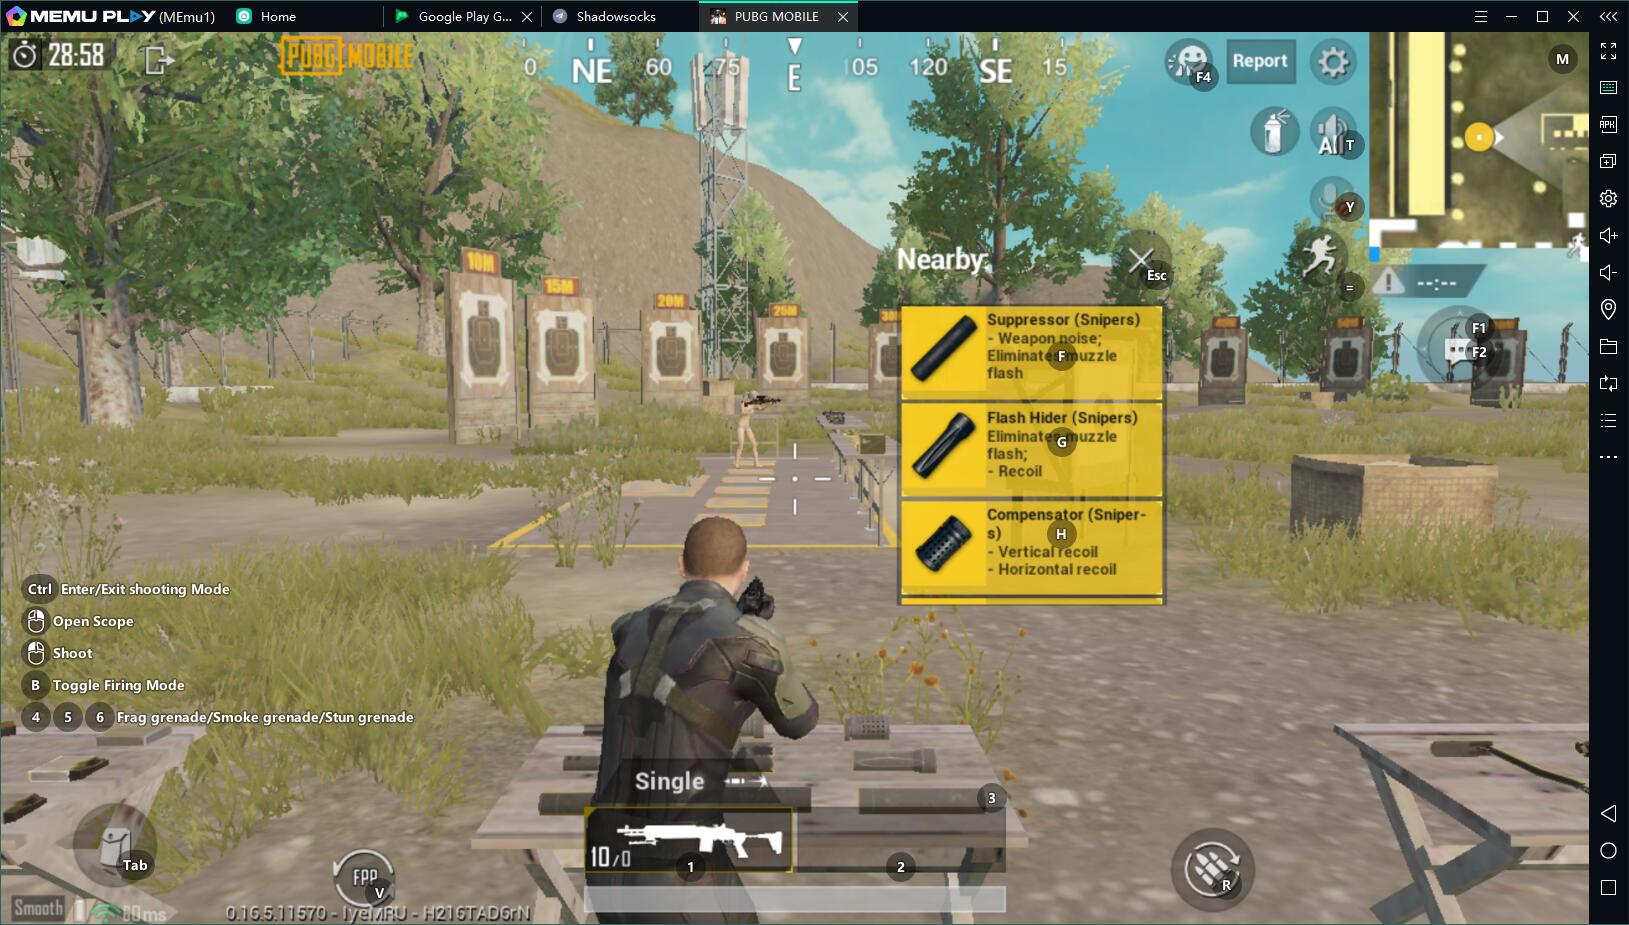 Best Emulator to Play PUBG Mobile on PC PC